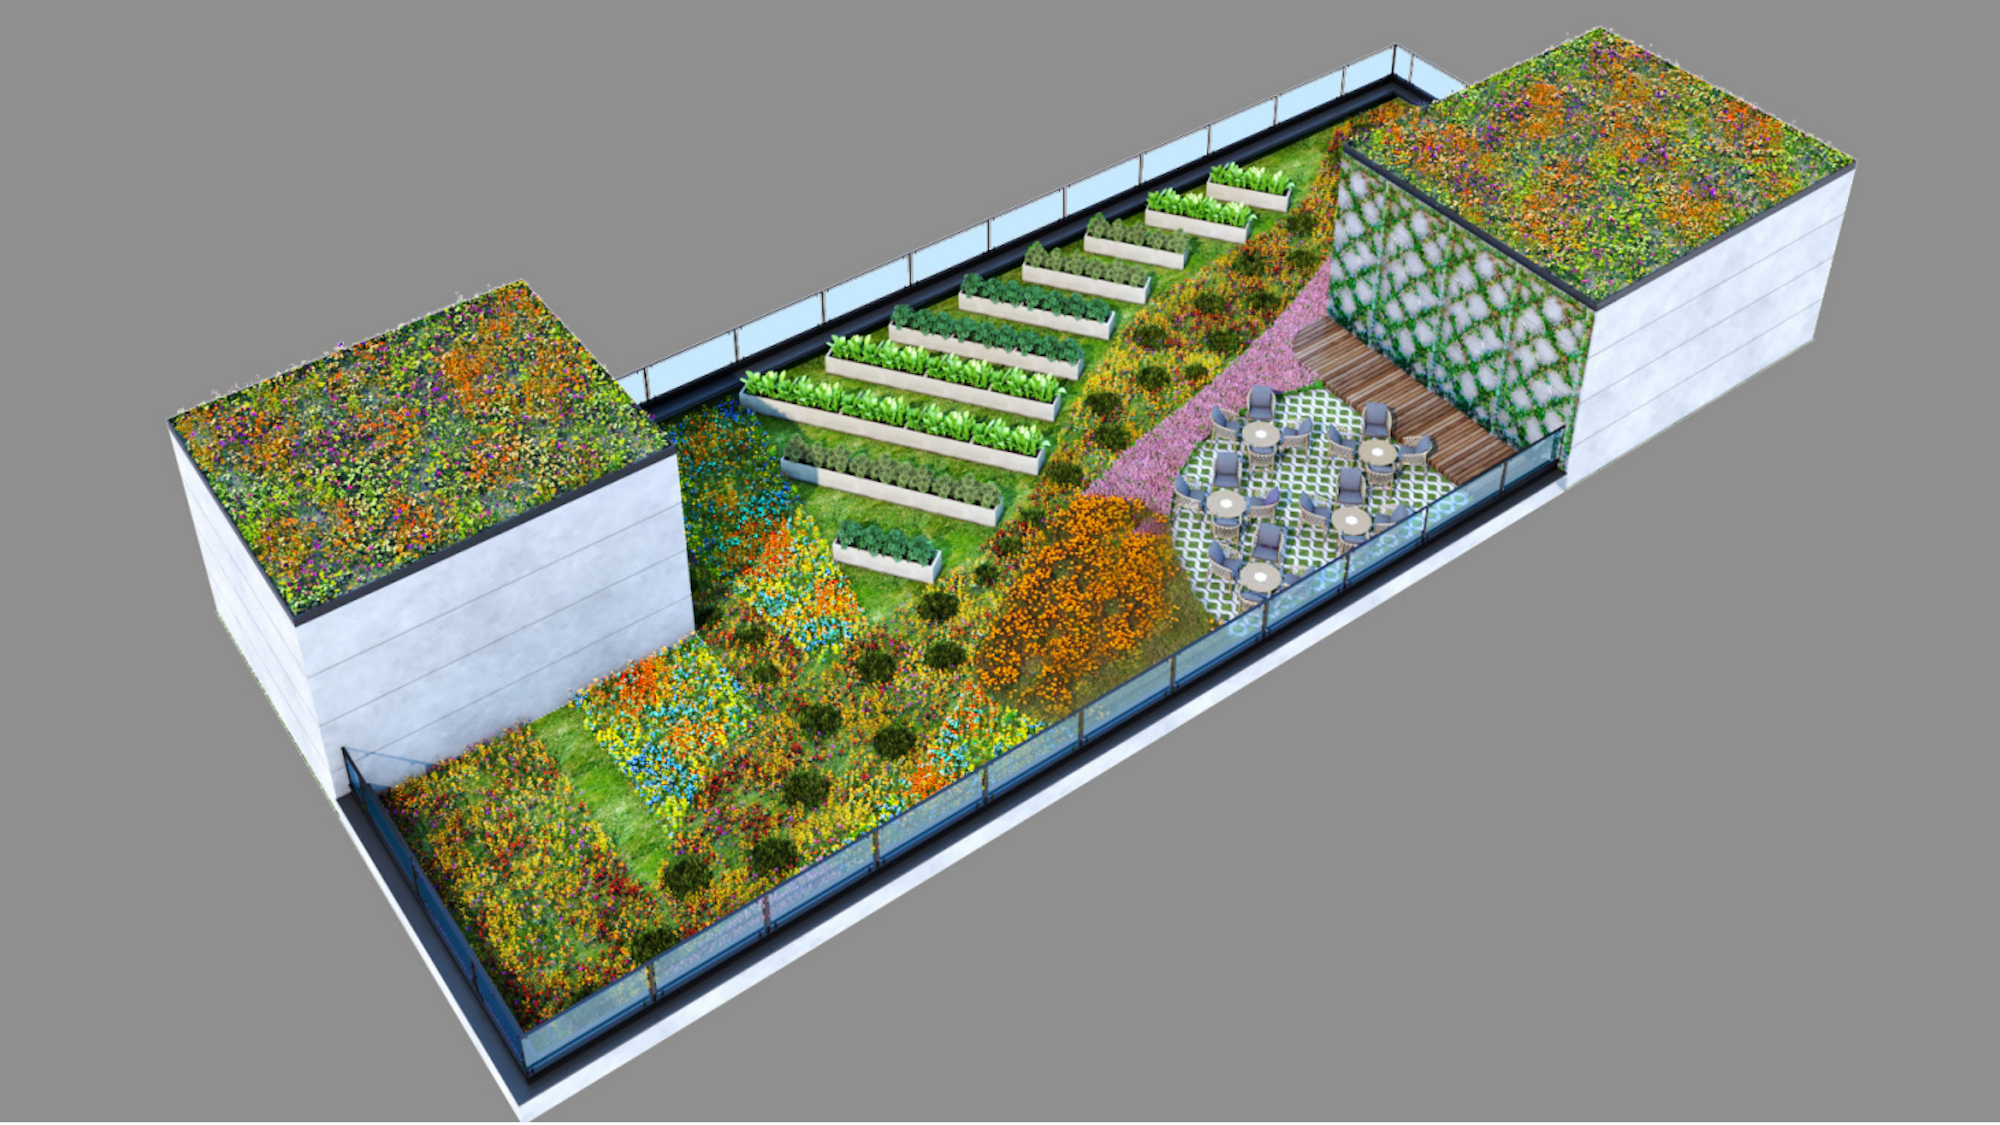 3D isometric plan of an intensive green roof with wildflowers, seating areas and an urban farm